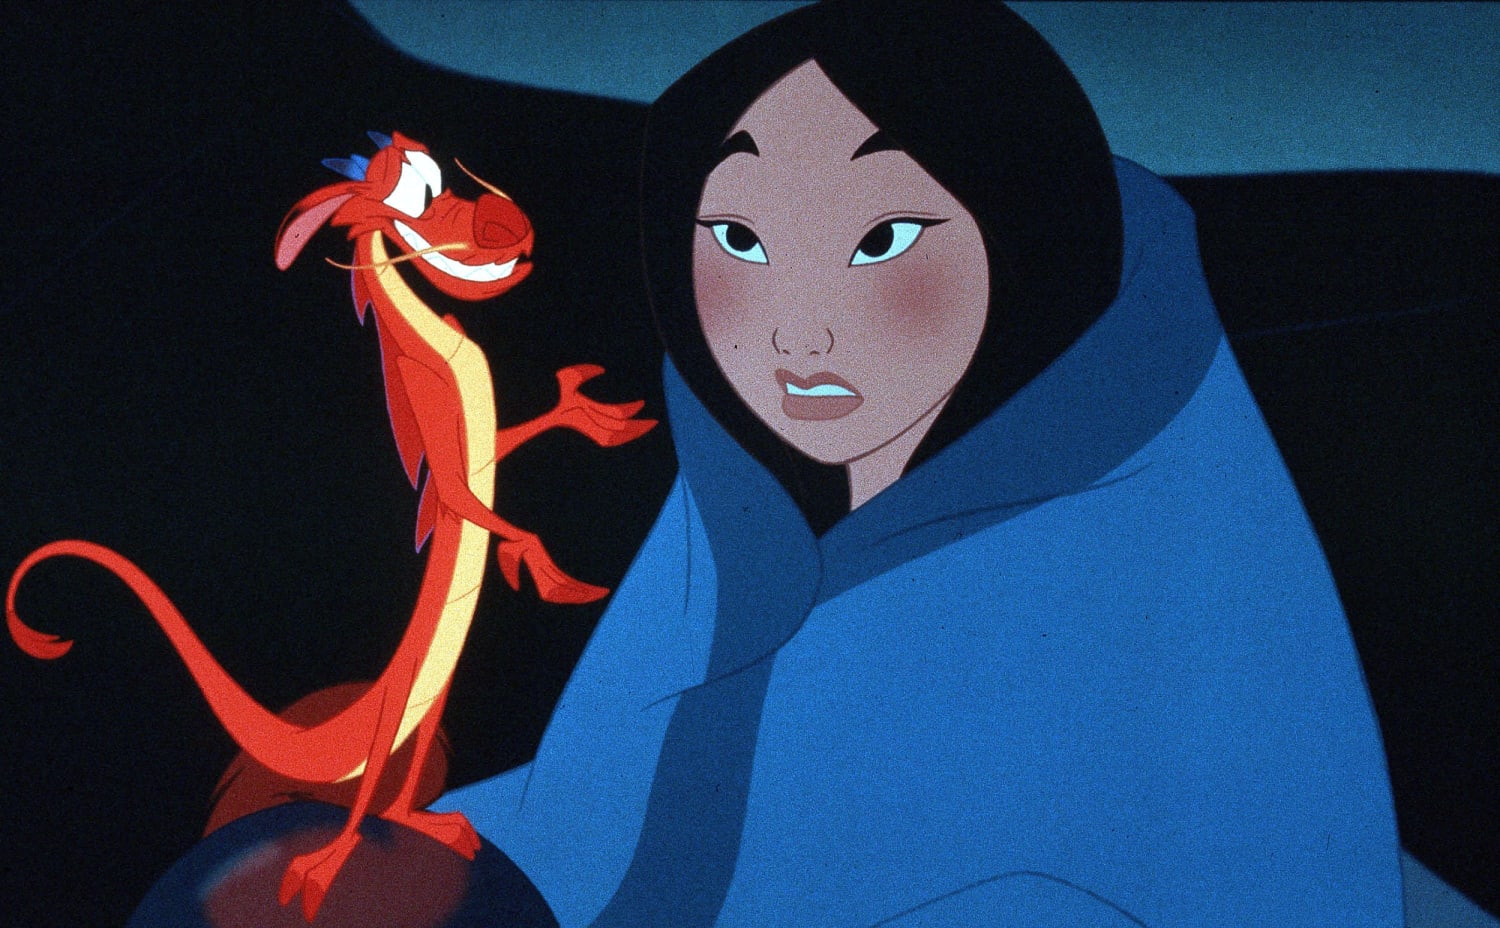 See the 1st trailer for the 2020 live-action 'Mulan' movie